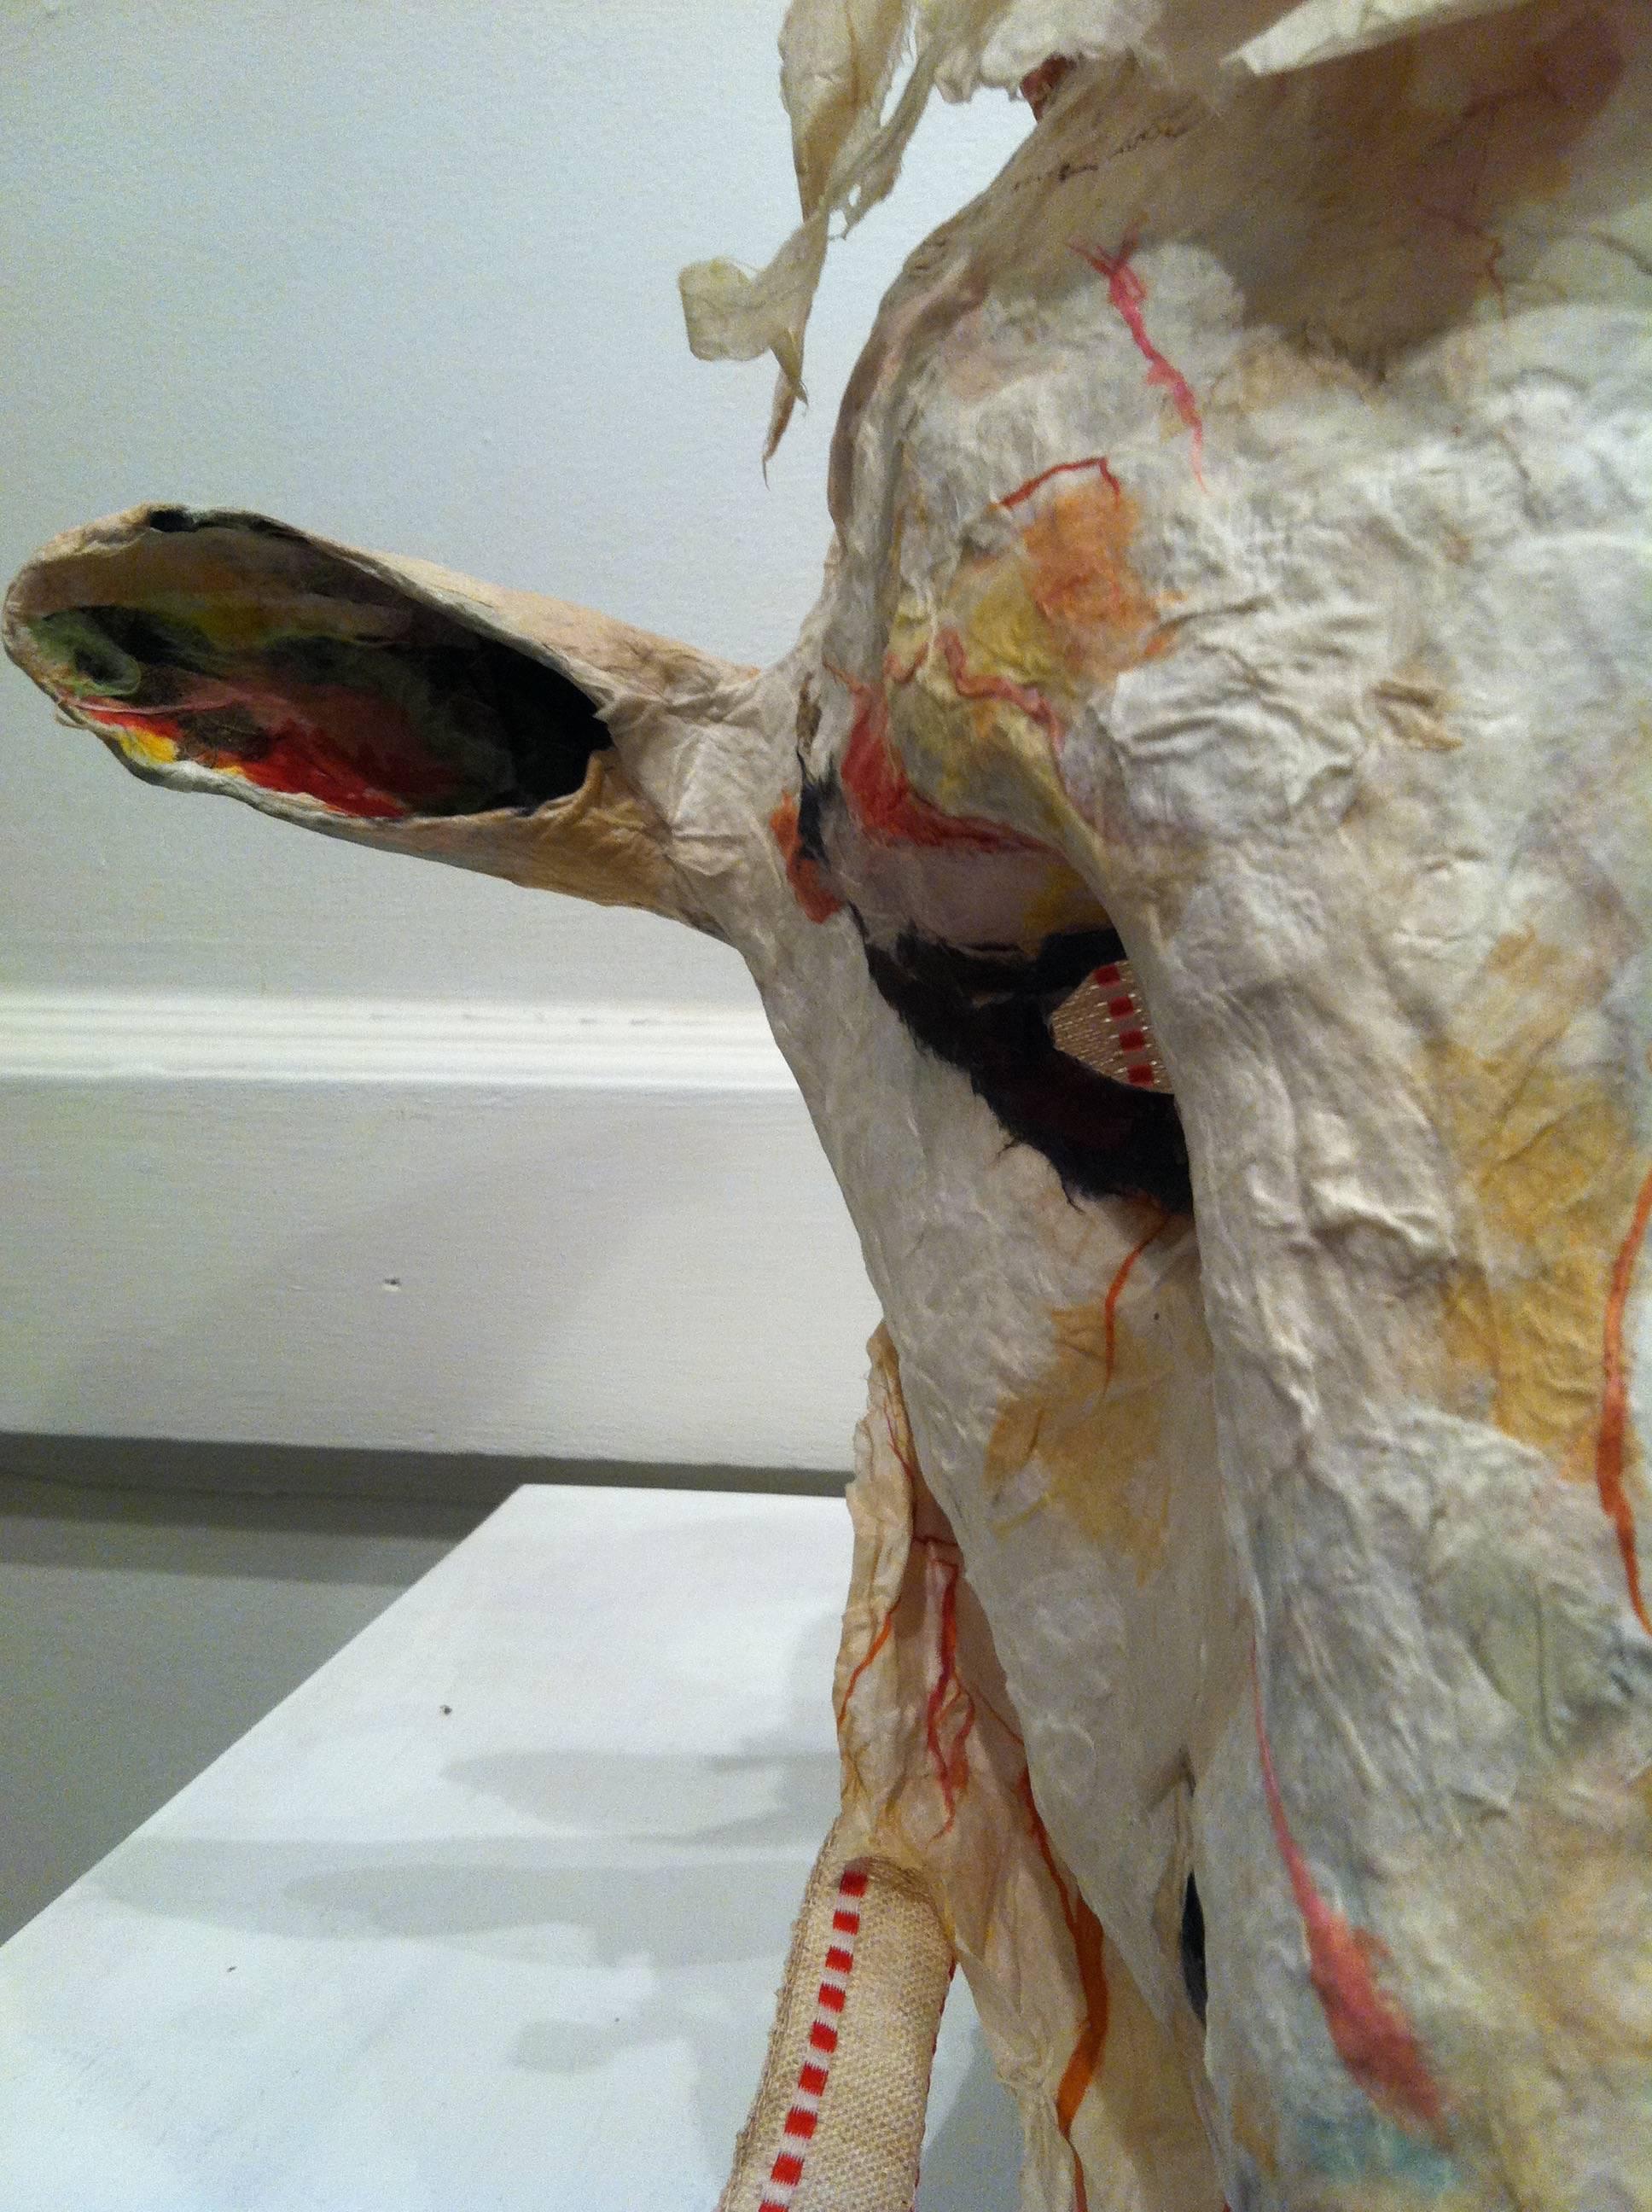 This sculptural mask is constructed in rice paper and mixed media materials. The mask has a dominant presence wherever it hangs. The anthropomorphic figure sometimes looks more animal, other times more human. It is lightly colored, akin to pearl